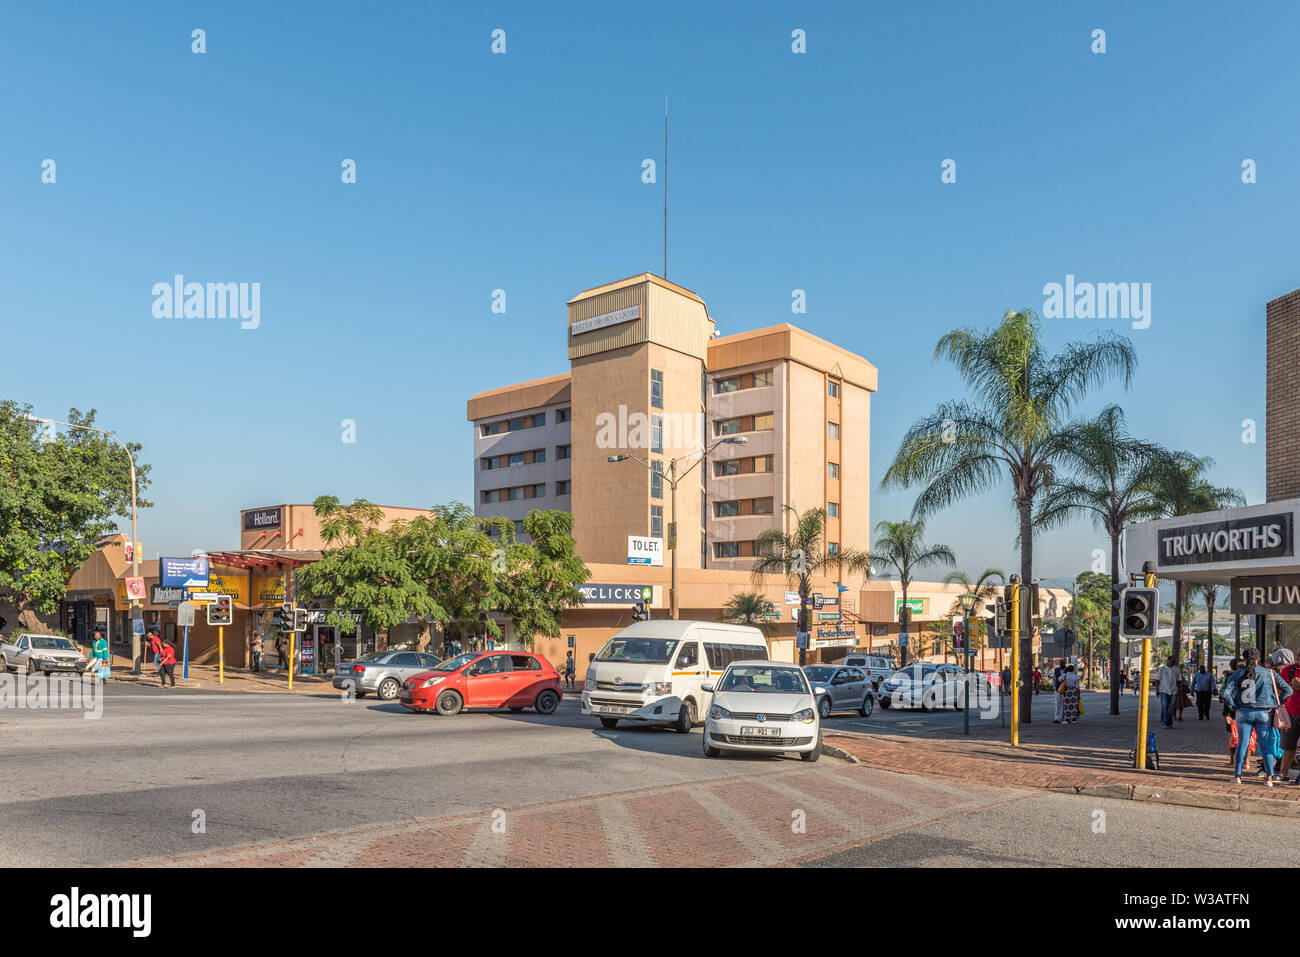 NELSPRUIT, SOUTH AFRICA - MAY 3, 2019: A street scene, with businesses, people and vehicles, in Nelspruit, in the Mpumalanga Province Stock Photo